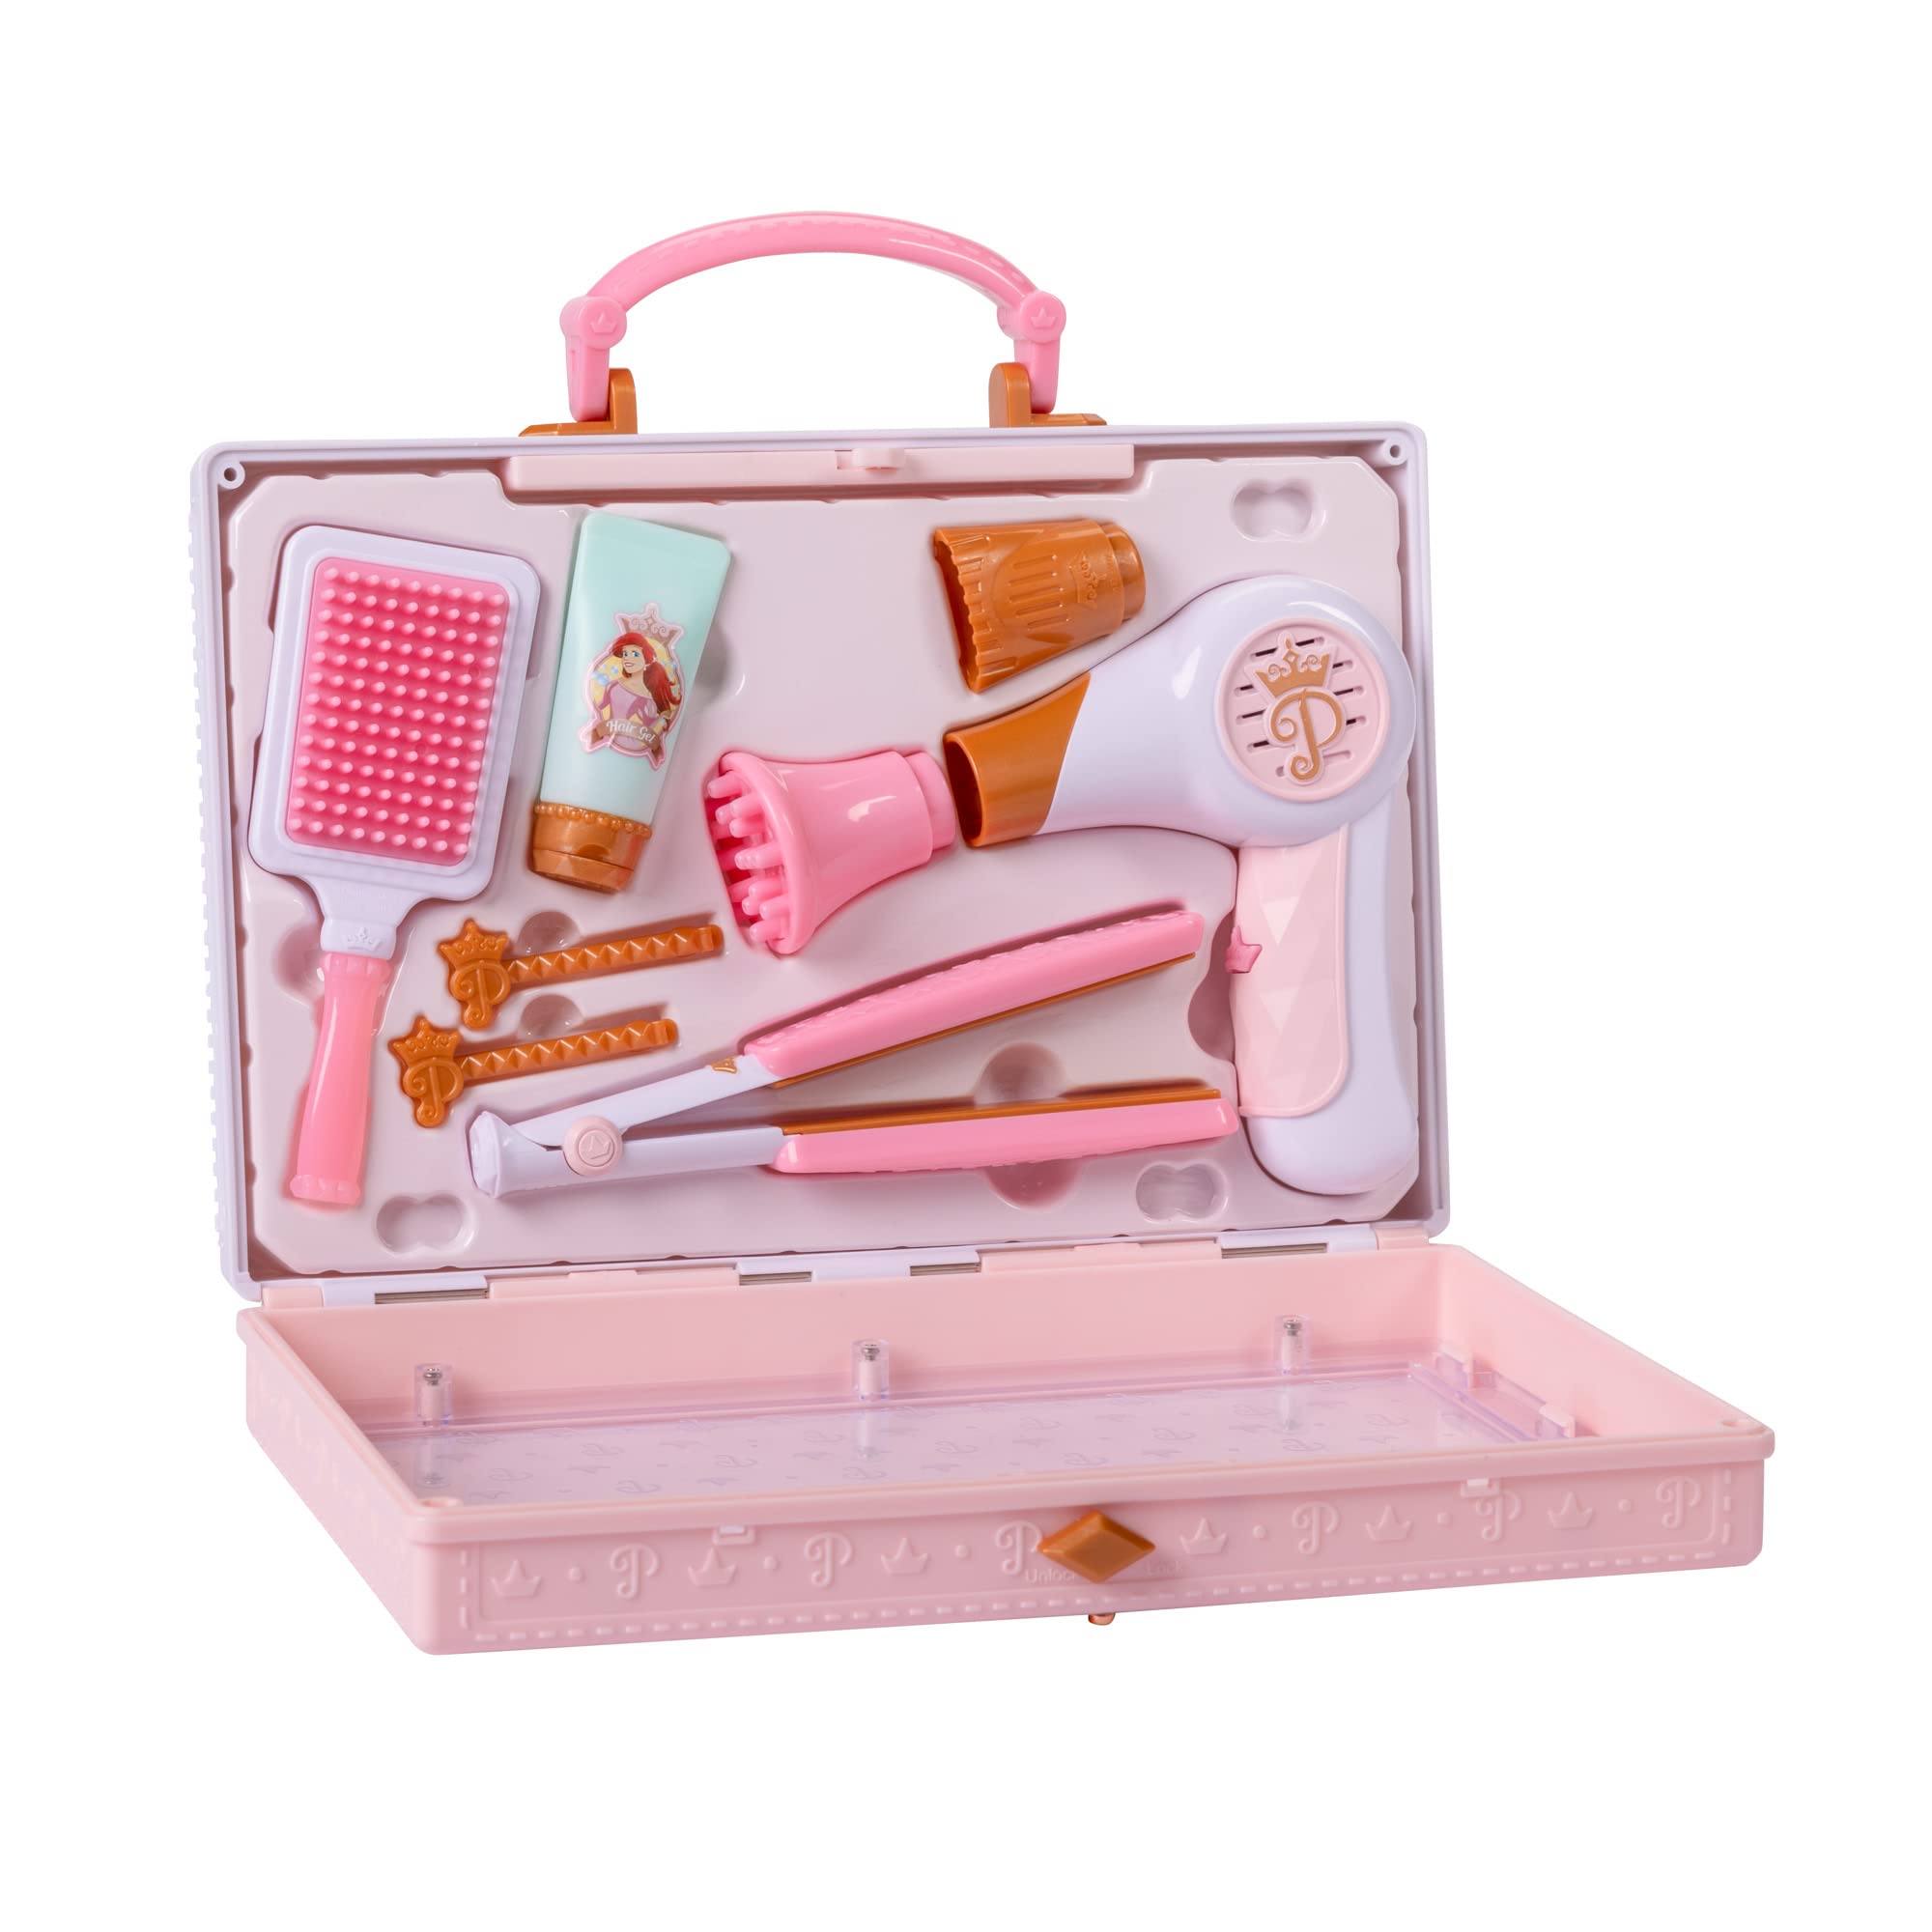 Disney Princess Style Collection Girls Trendy Hair Pretend Play Styling Tools with Sound & Storage Tote for On-the-Go!